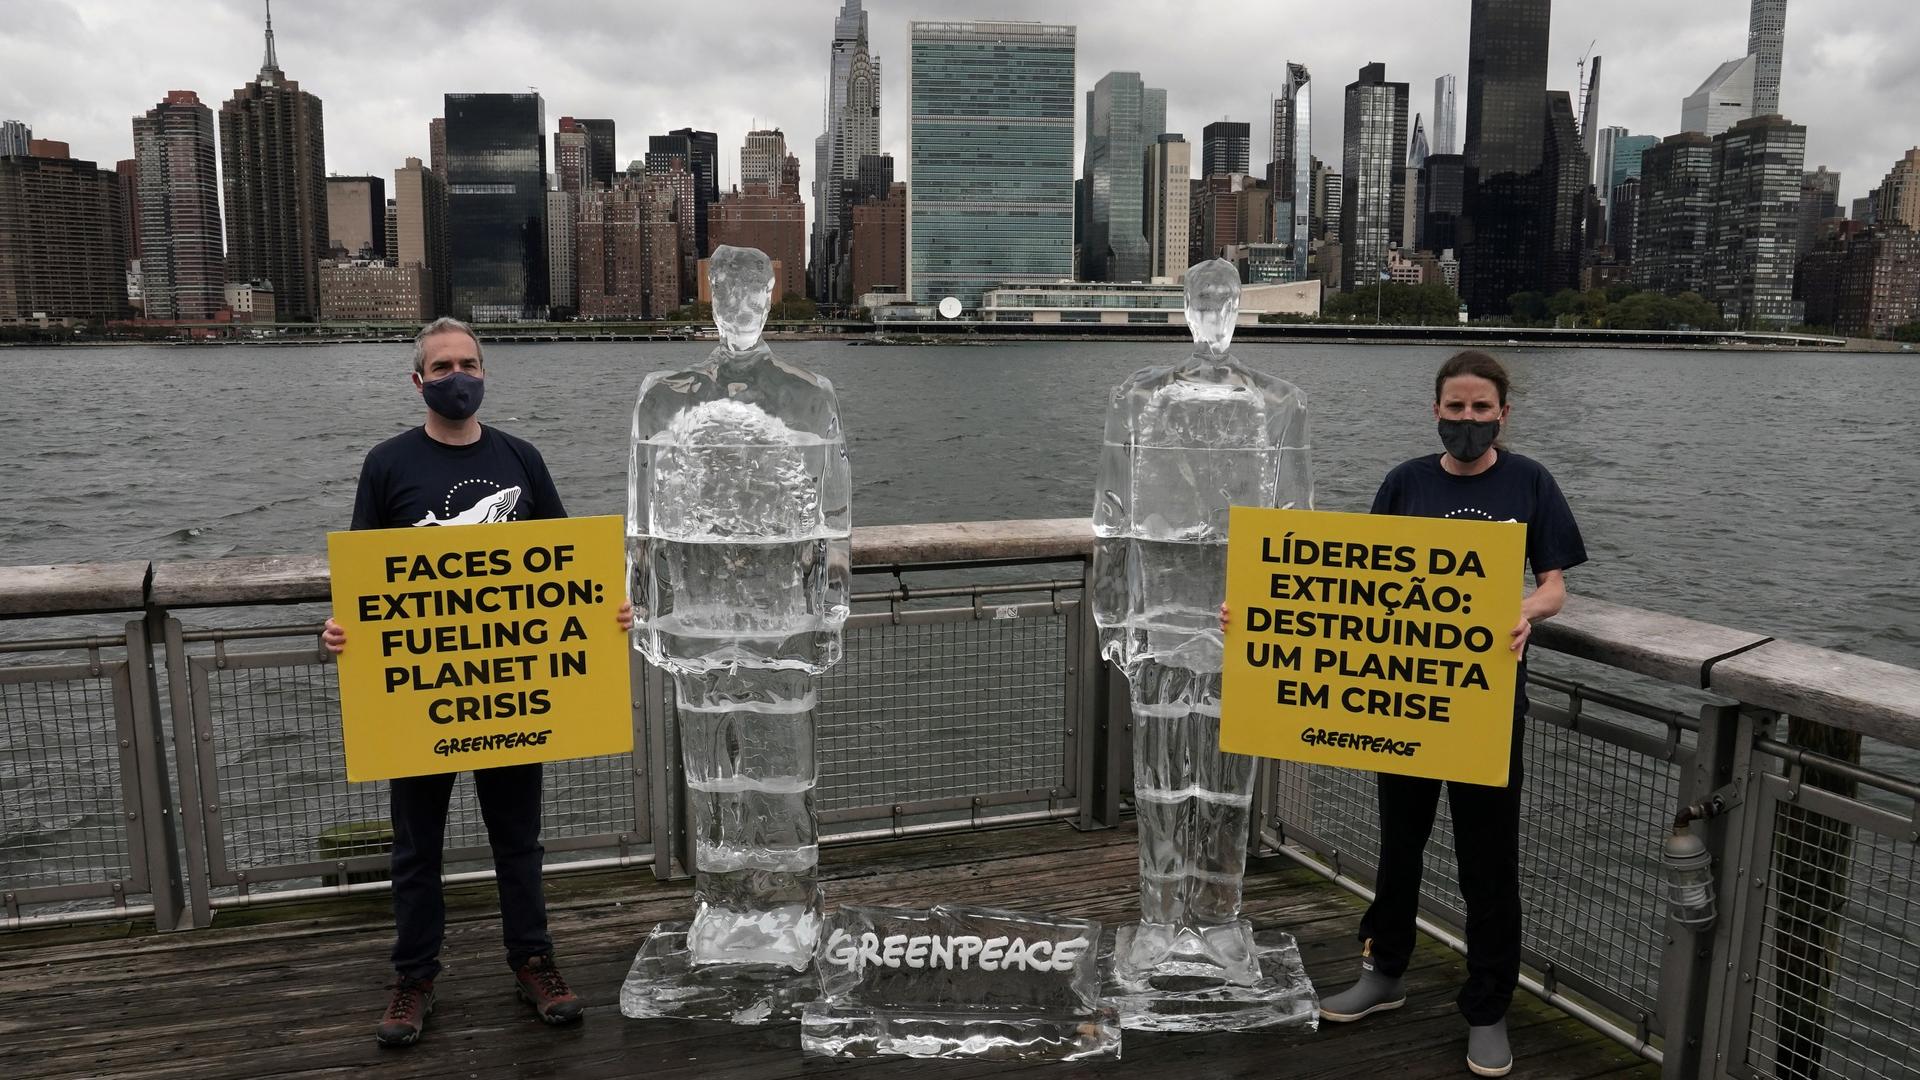 Greenpeace activists hold signs between two ice sculptures depicting US President Donald Trump and Brazil's President Jair Bolsonaro across the Hudson River from UN headquarters in the Queens borough of New York City, Sept. 30, 2020.